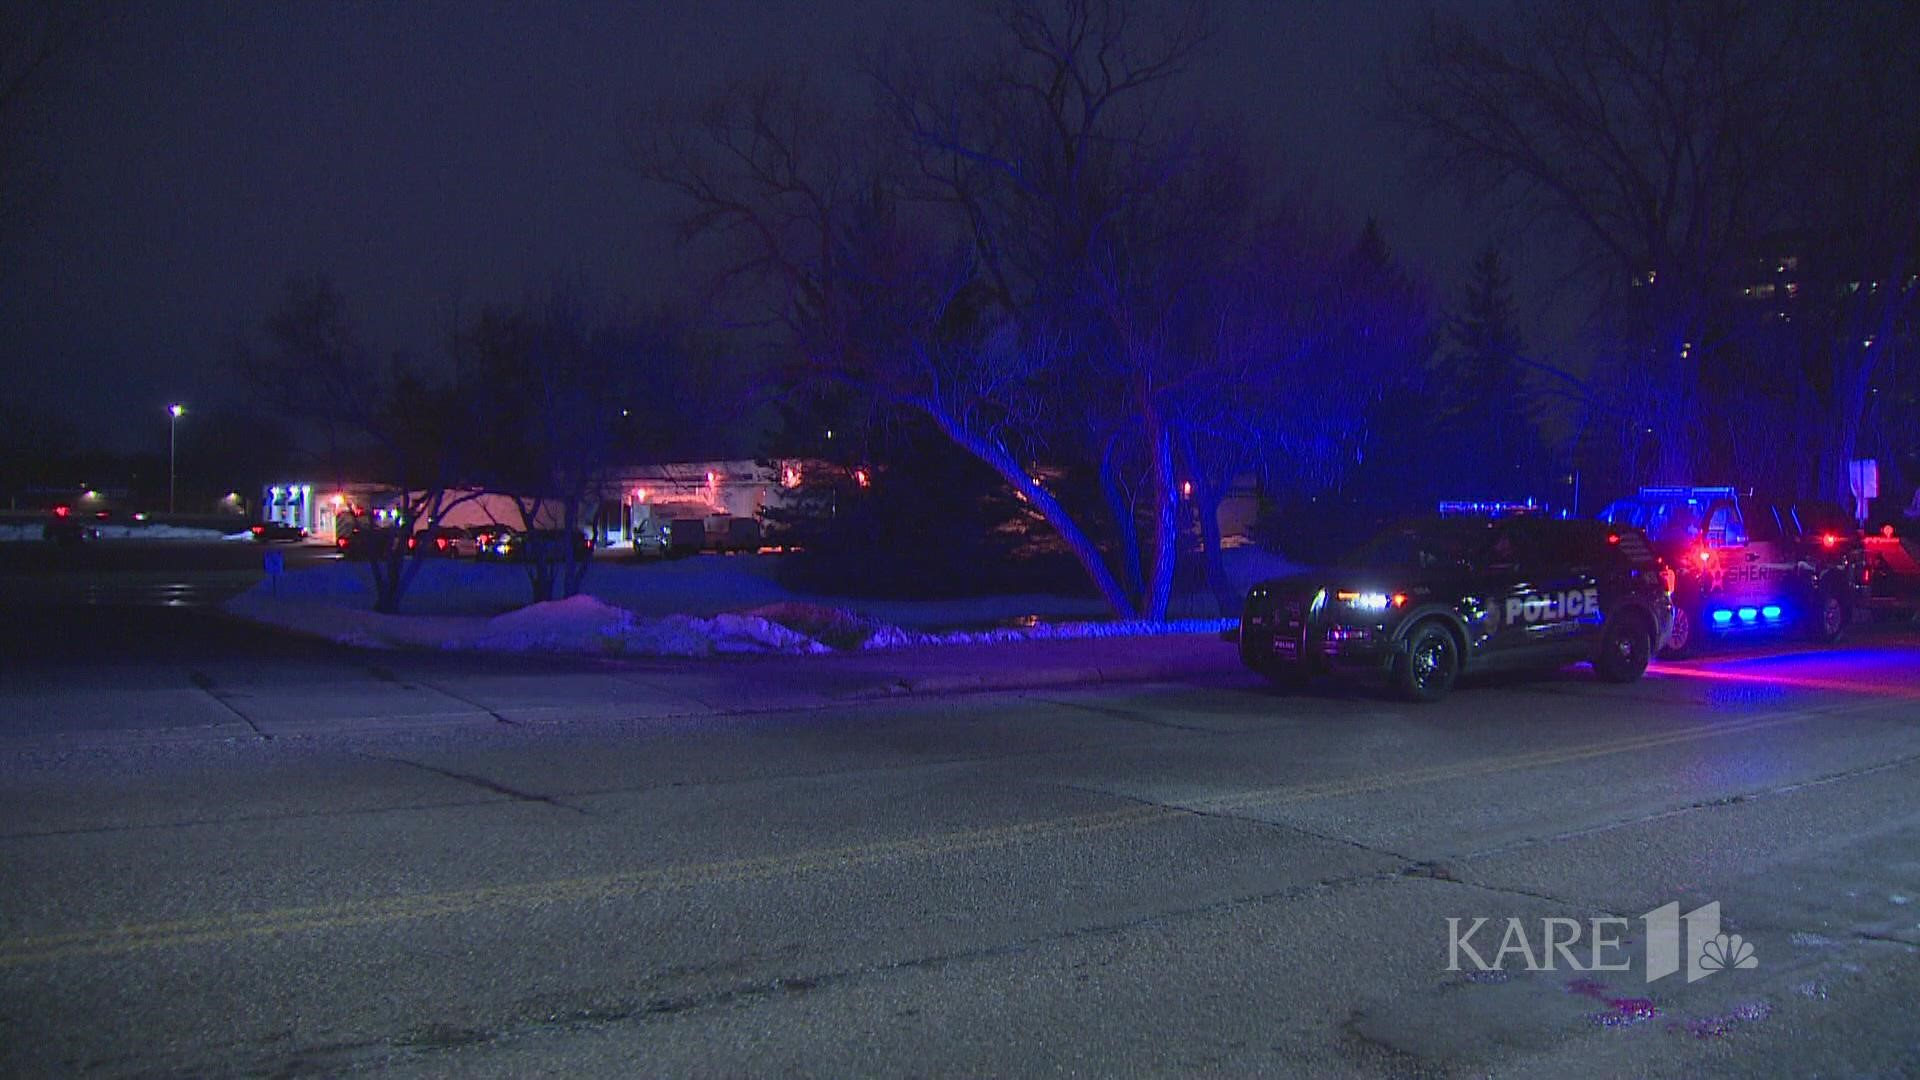 St. Louis Park Police said five police squad cars were damaged and an officer had minor injuries after shoplifting suspects used their vehicle to ram the squads.